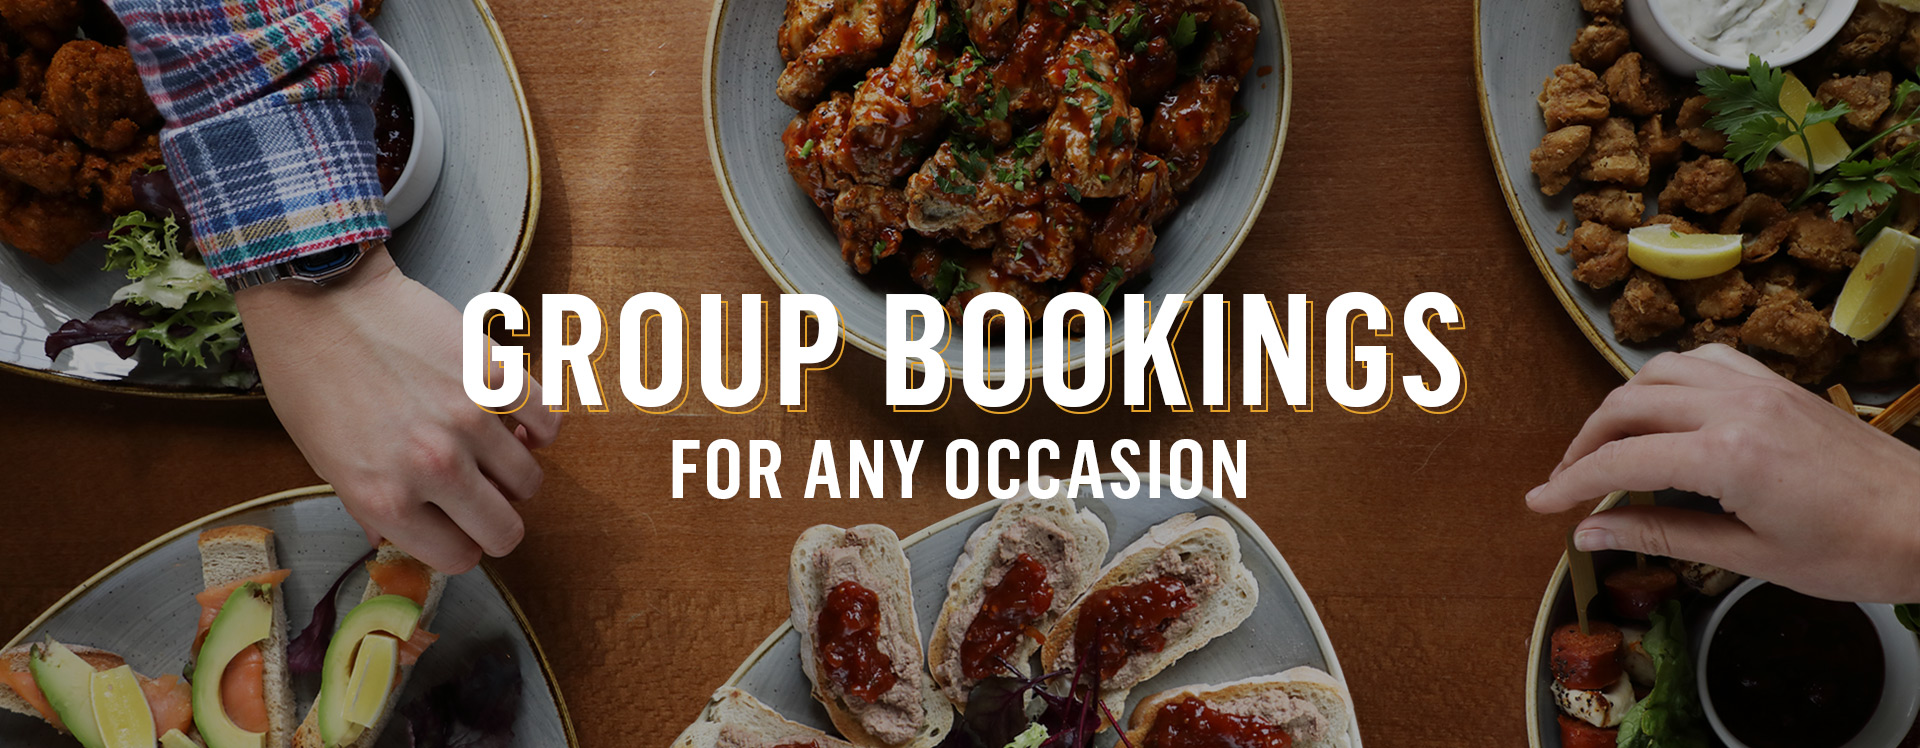 Group Bookings at The Victoria Comet